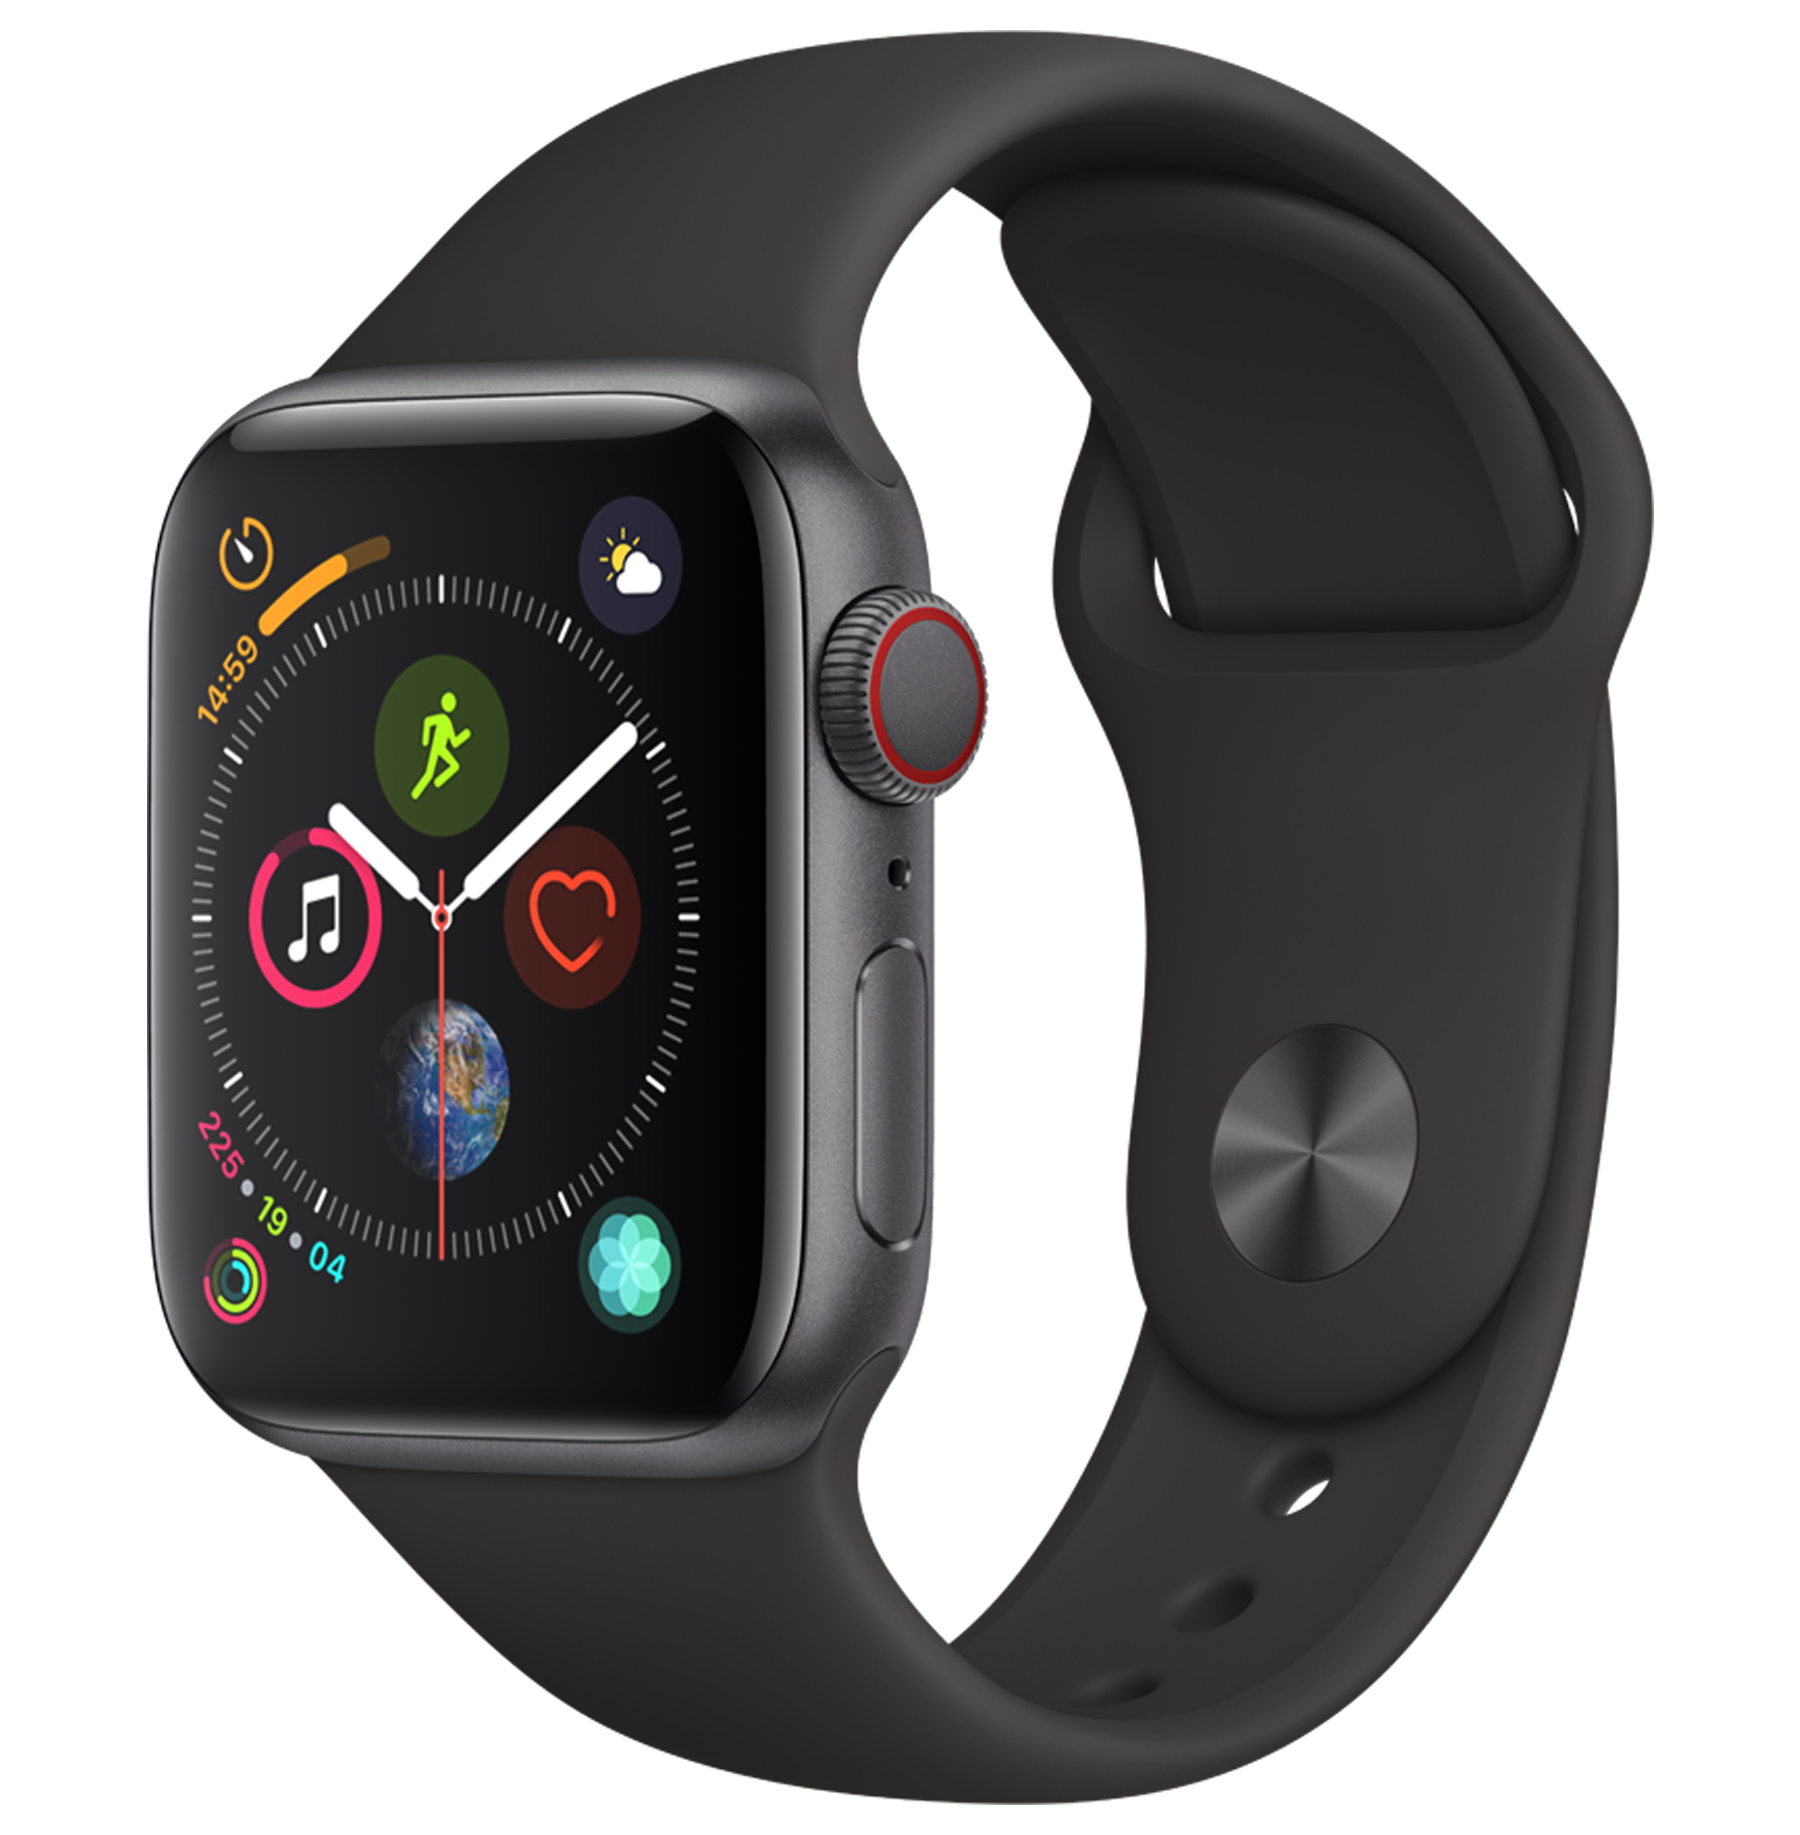 Apple Watch | Apple smartwatch and accessories | Rogers